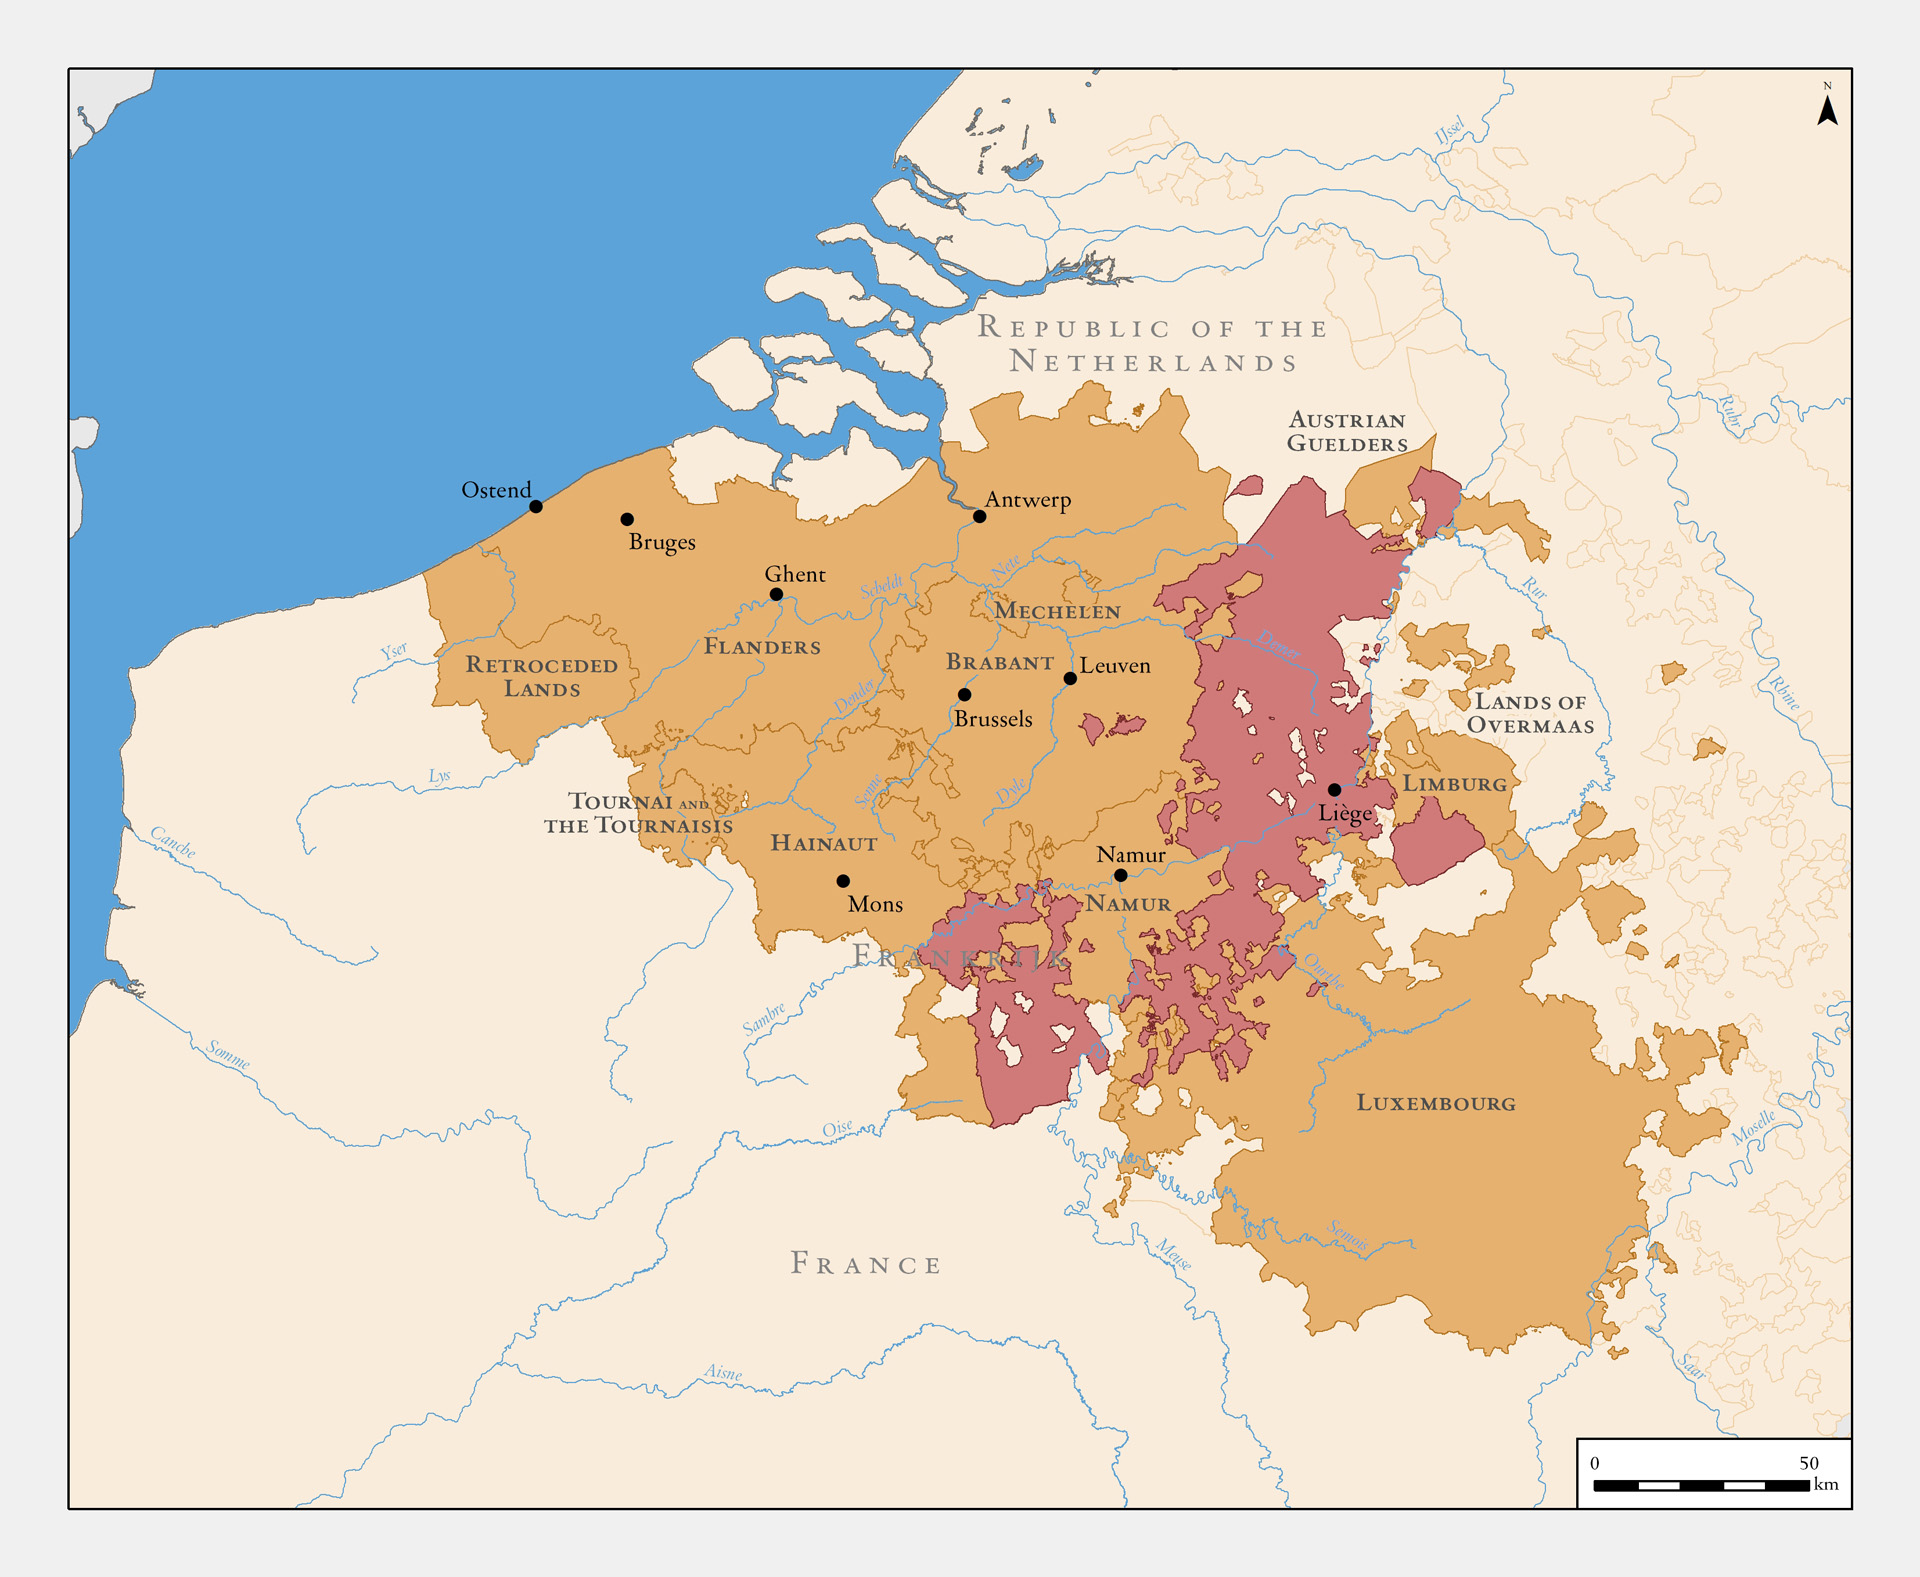 The Austro-Habsburg Netherlands and the Prince-Bishopric of Liège, 18th century